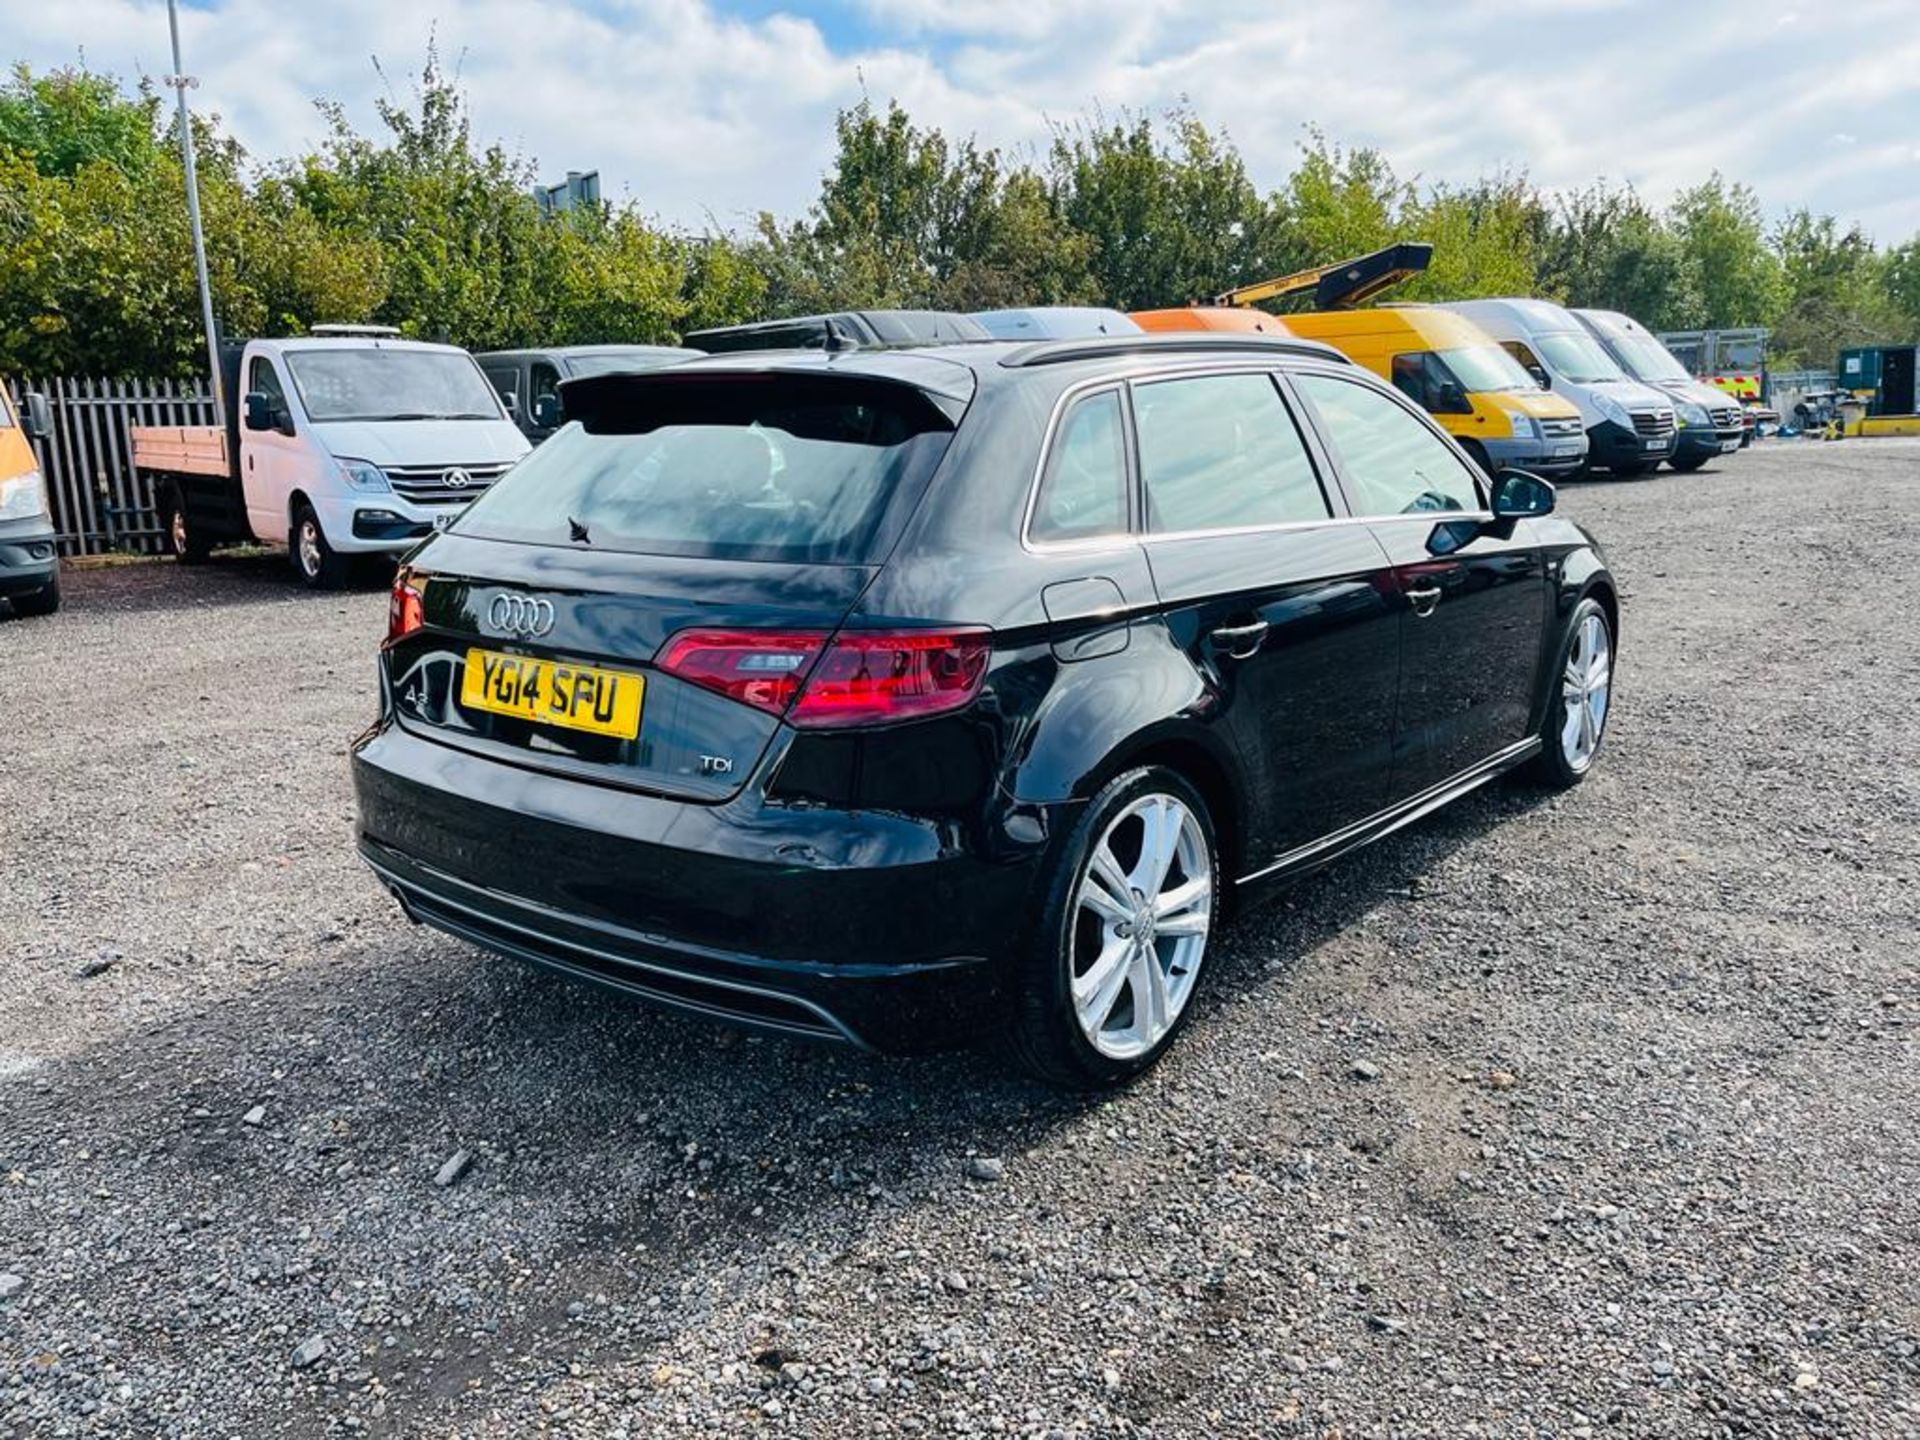 ** ON SALE ** Audi A3 S Line 105 TDI 1.6 2014 "14 Reg" Air Conditioning - Alloy Wheels - No Vat - Image 9 of 30